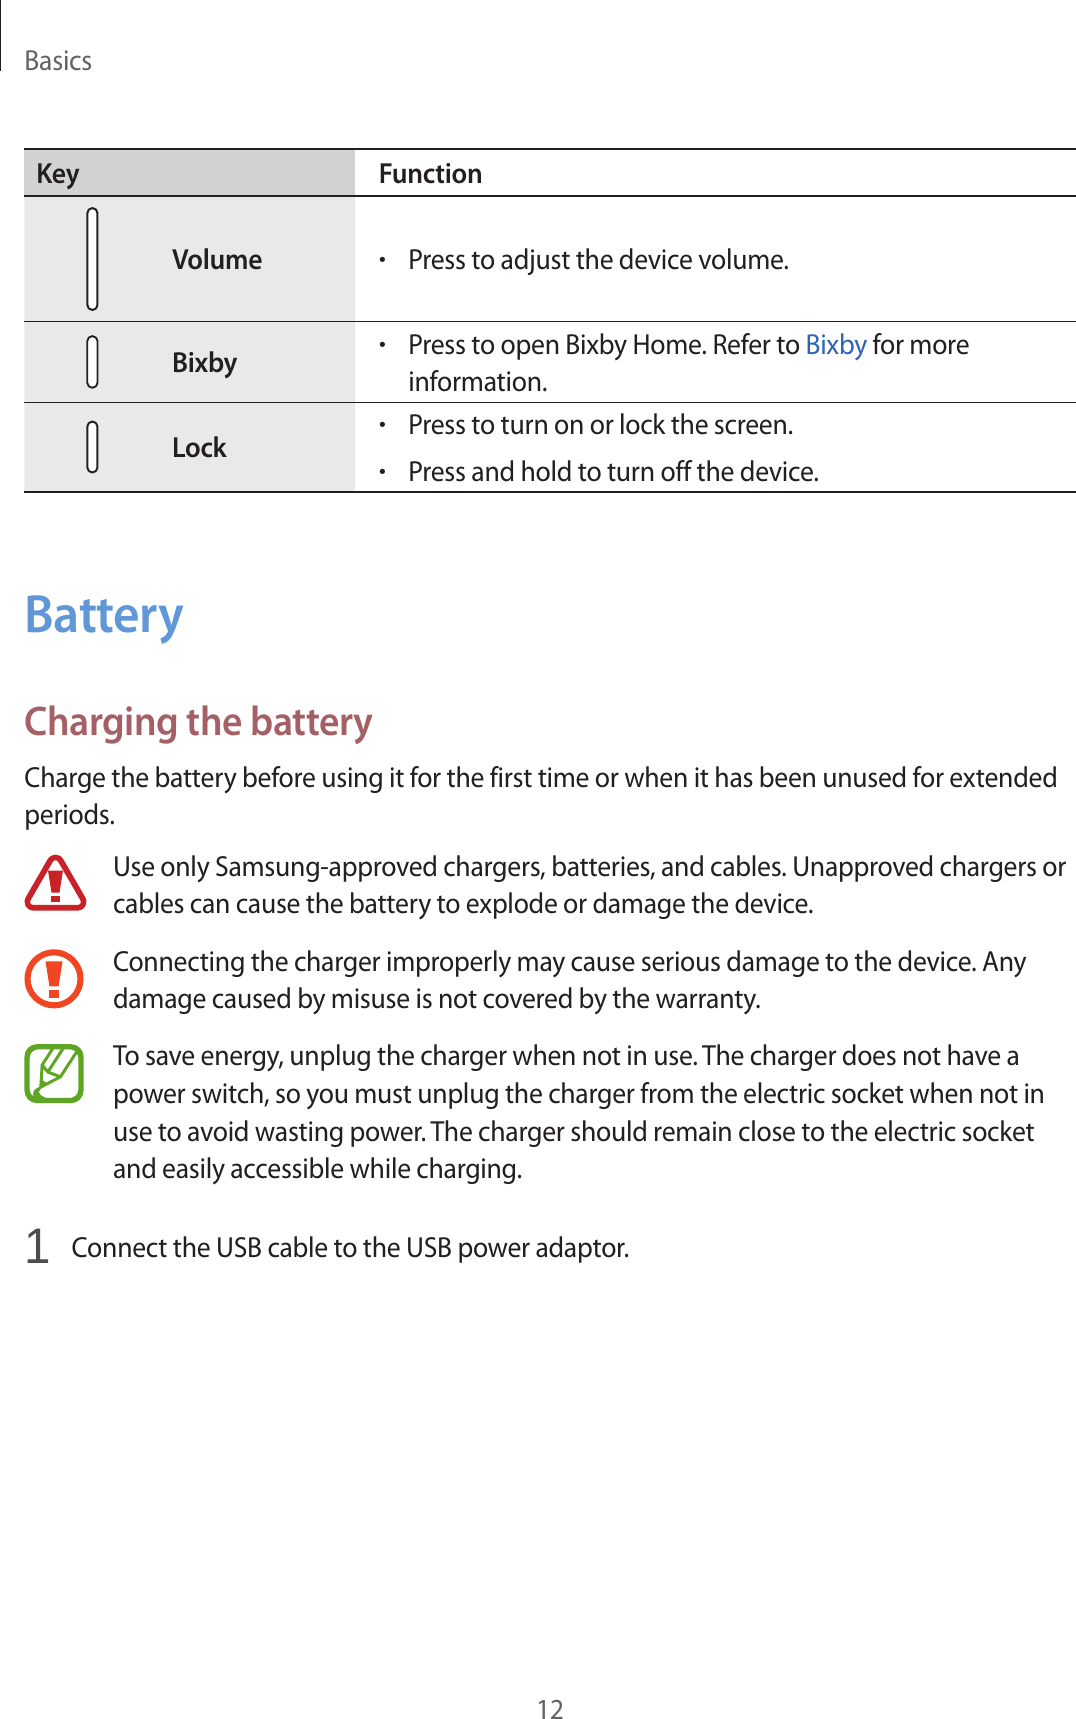 Basics12Key FunctionVolume•Press to adjust the device volume.Bixby•Press to open Bixby Home. Refer to Bixby for more information.Lock•Press to turn on or lock the screen.•Press and hold to turn off the device.BatteryCharging the batteryCharge the battery before using it for the first time or when it has been unused for extended periods.Use only Samsung-approved chargers, batteries, and cables. Unapproved chargers or cables can cause the battery to explode or damage the device.Connecting the charger improperly may cause serious damage to the device. Any damage caused by misuse is not covered by the warranty.To save energy, unplug the charger when not in use. The charger does not have a power switch, so you must unplug the charger from the electric socket when not in use to avoid wasting power. The charger should remain close to the electric socket and easily accessible while charging.1  Connect the USB cable to the USB power adaptor.